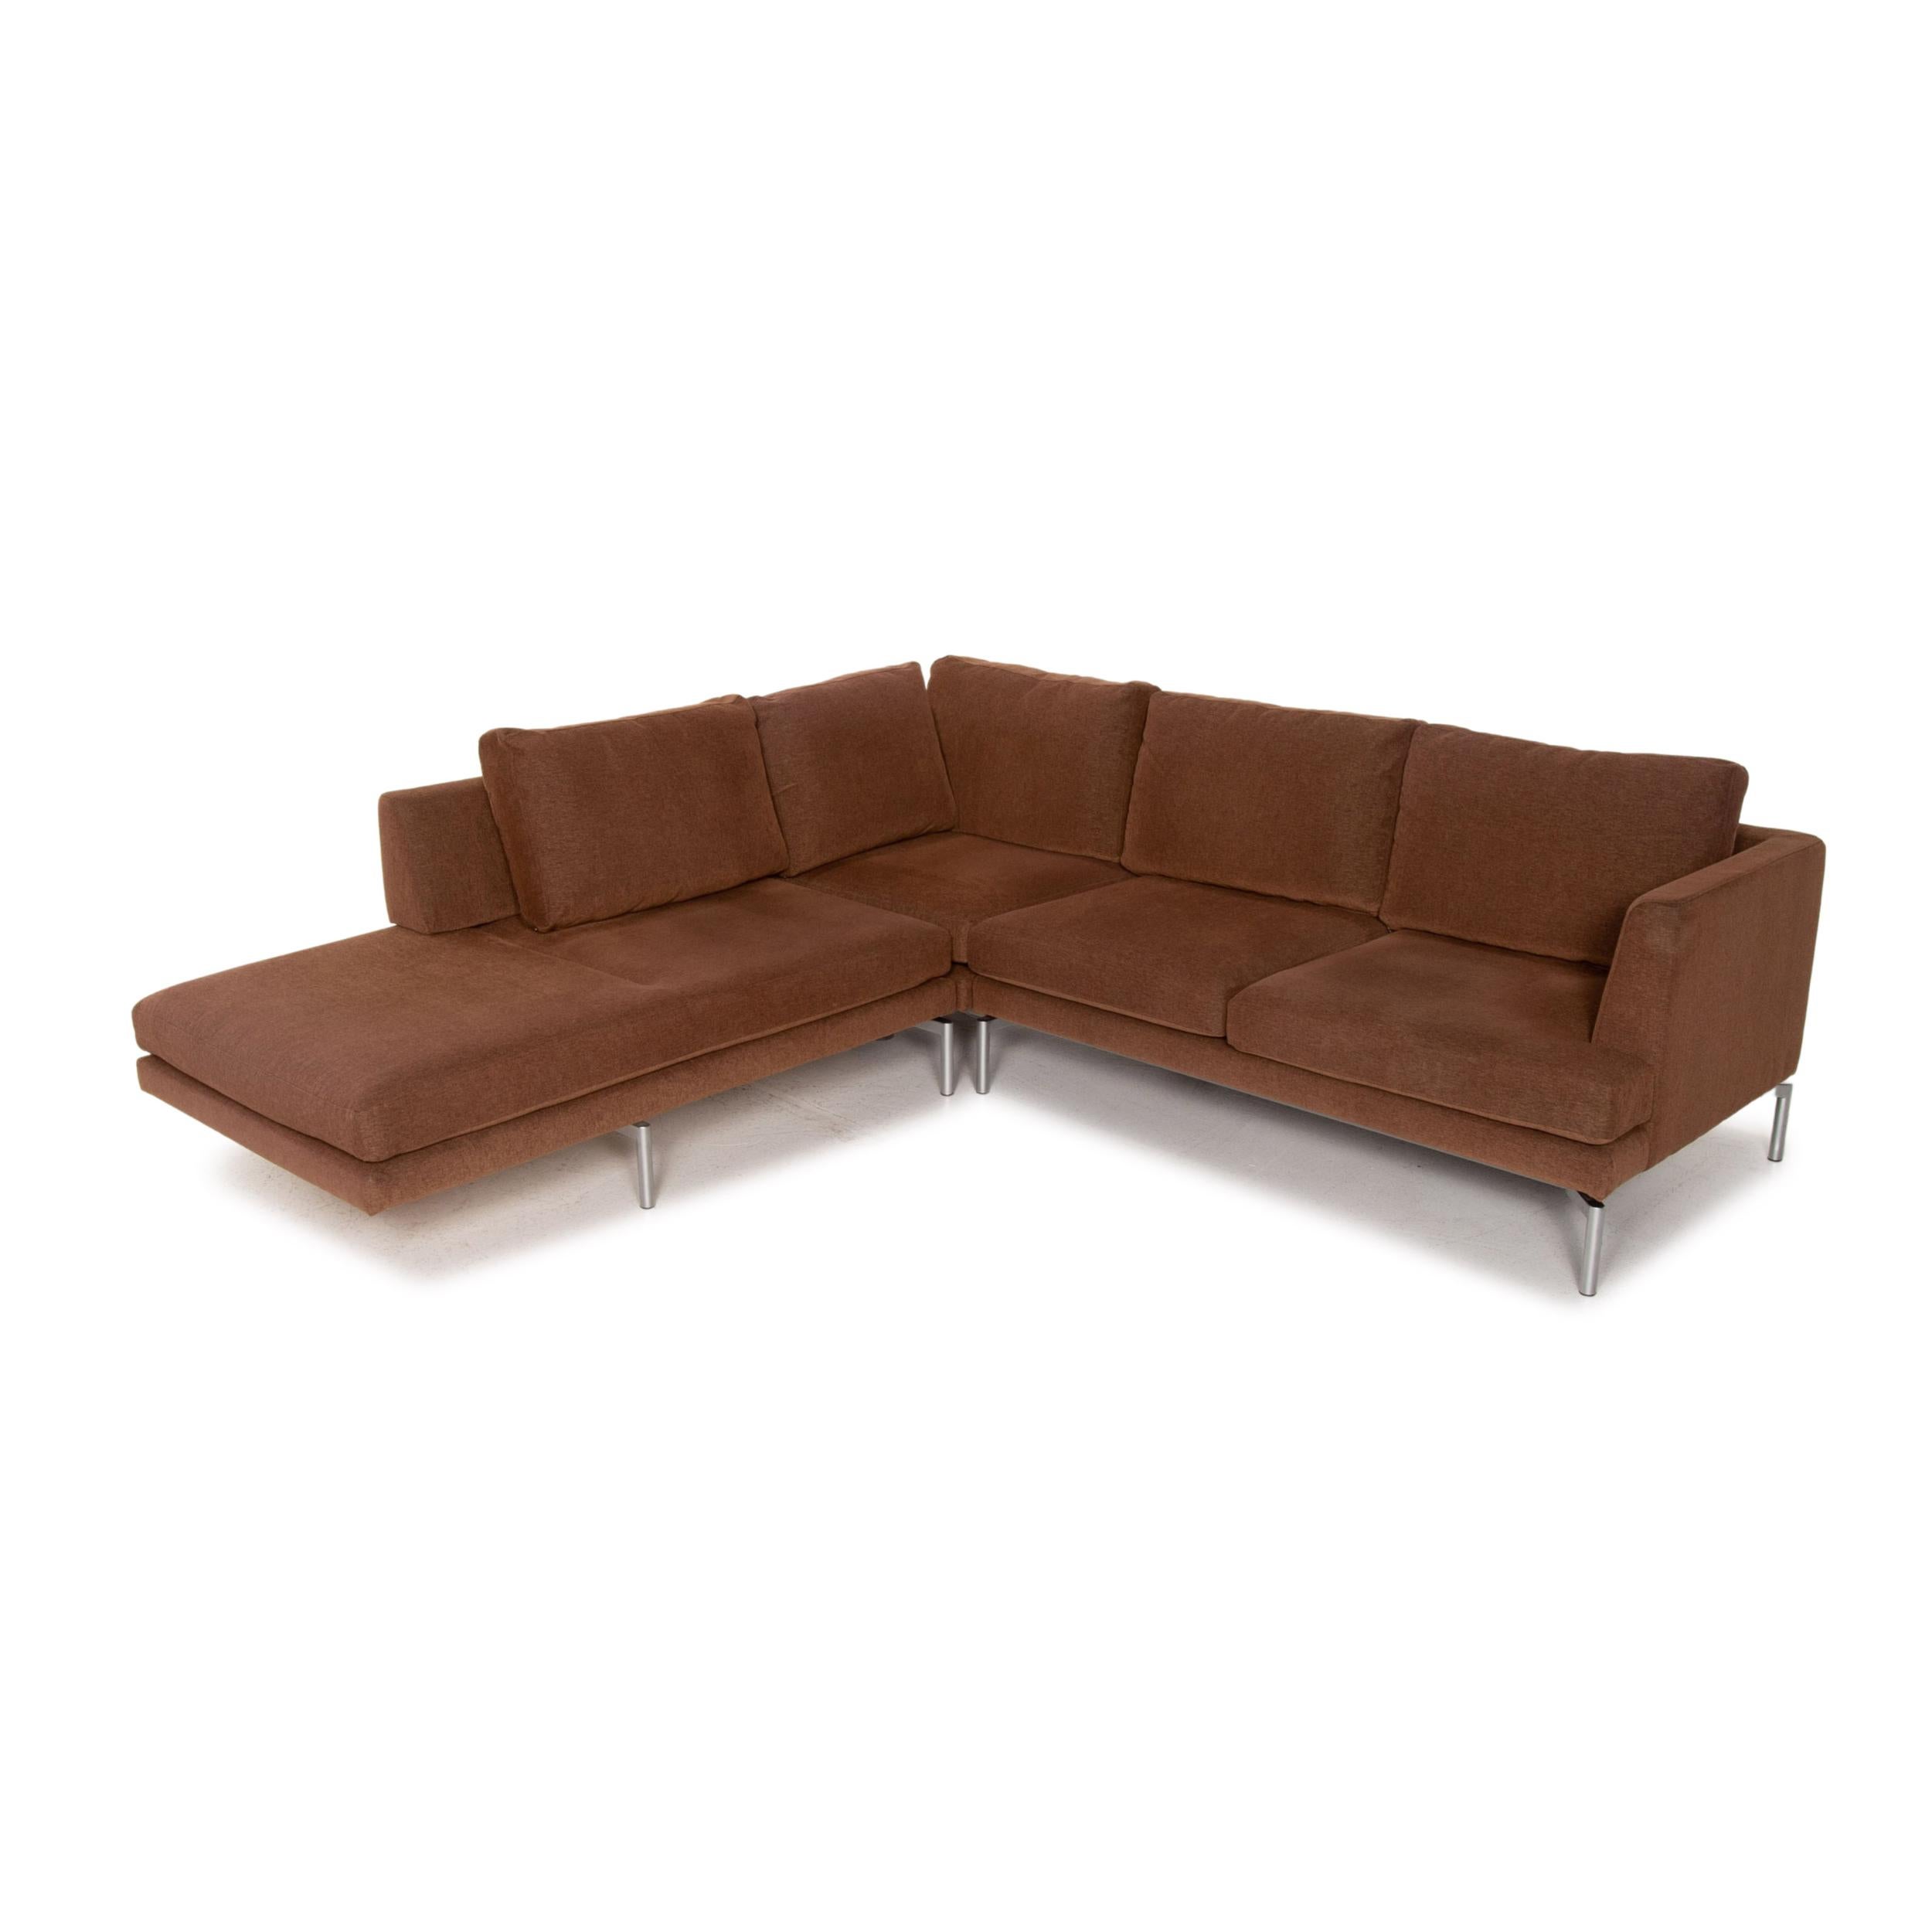 Walter Knoll Good Times Fabric Corner Sofa Brown Function Couch 1